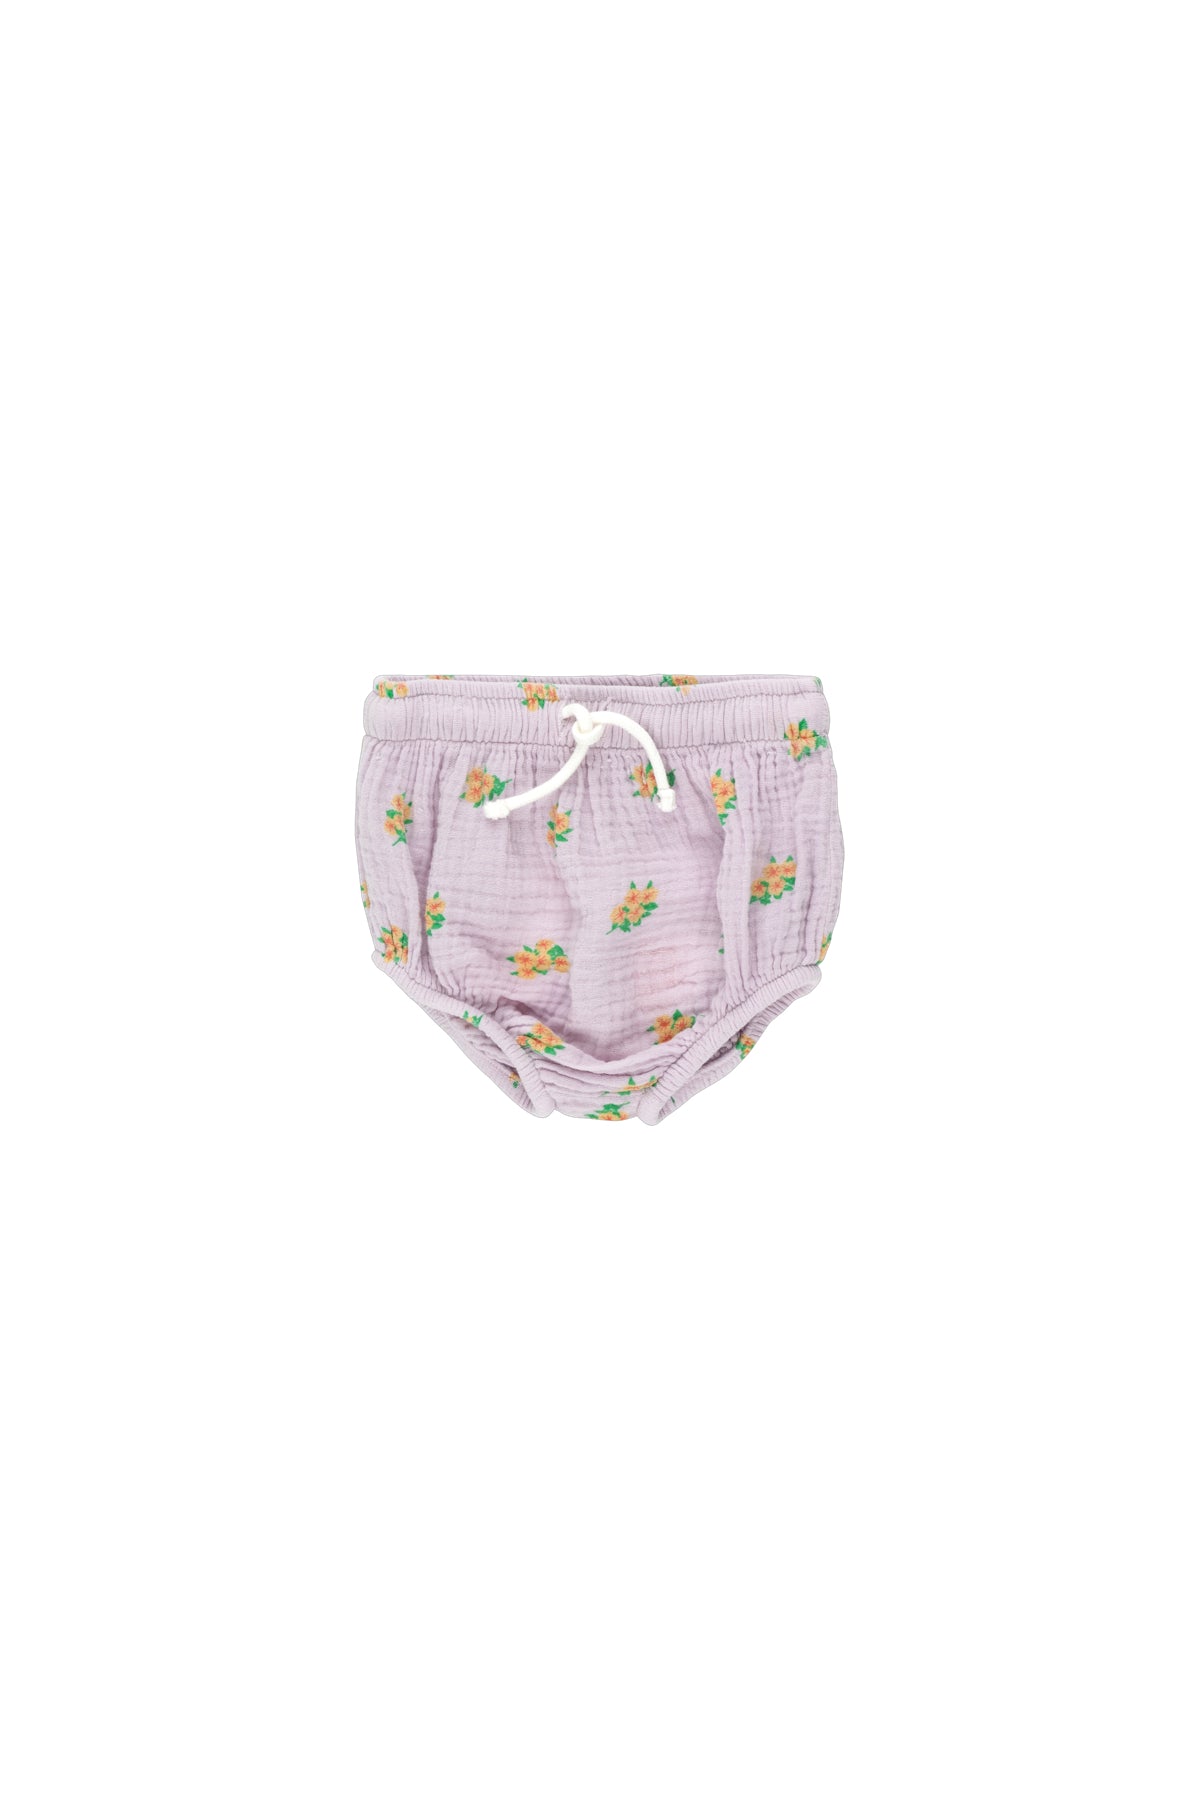 Tiny Cottons Flowers Baby Bloomer